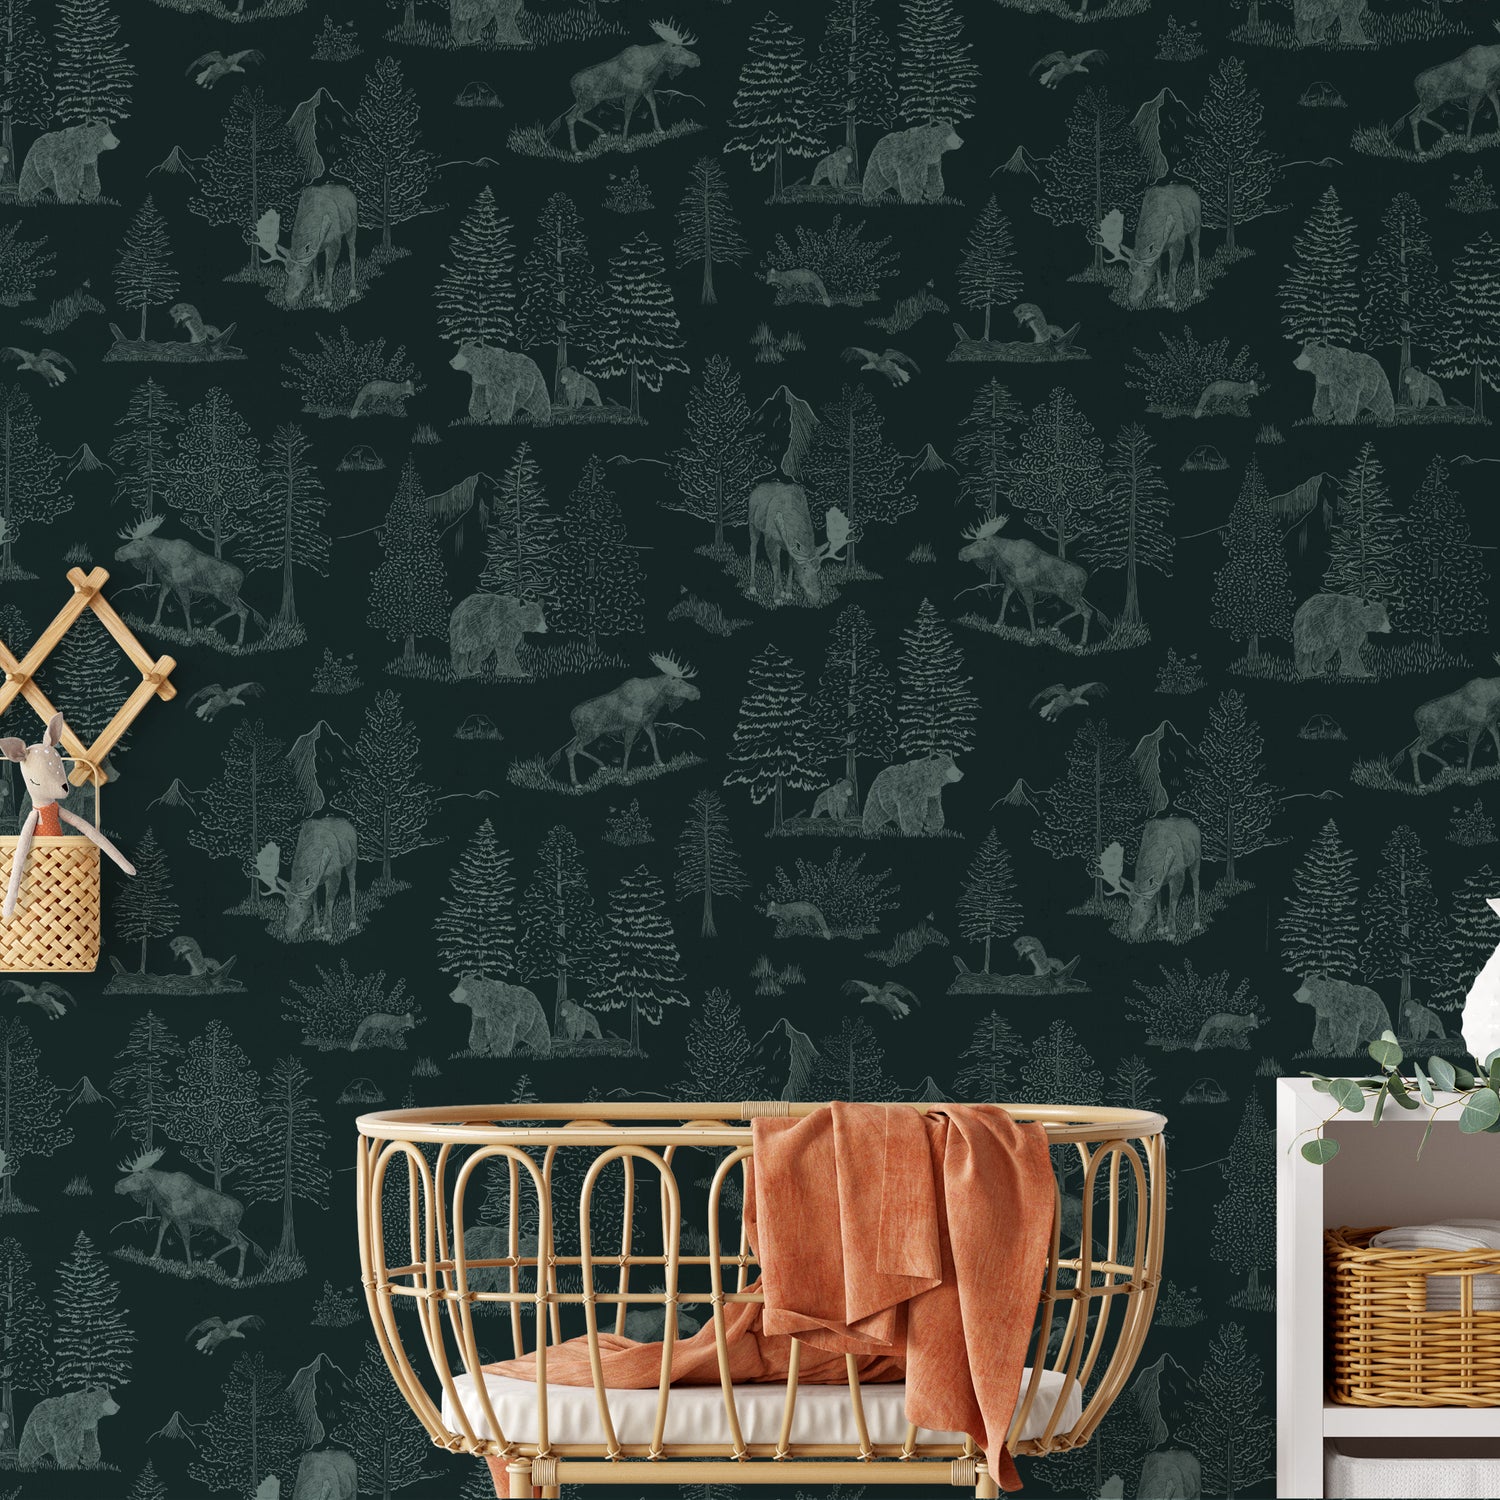 Bedroom  featuring Cayla Naylor Denali- Bering Peel and Stick Wallpaper - a nature inspired pattern